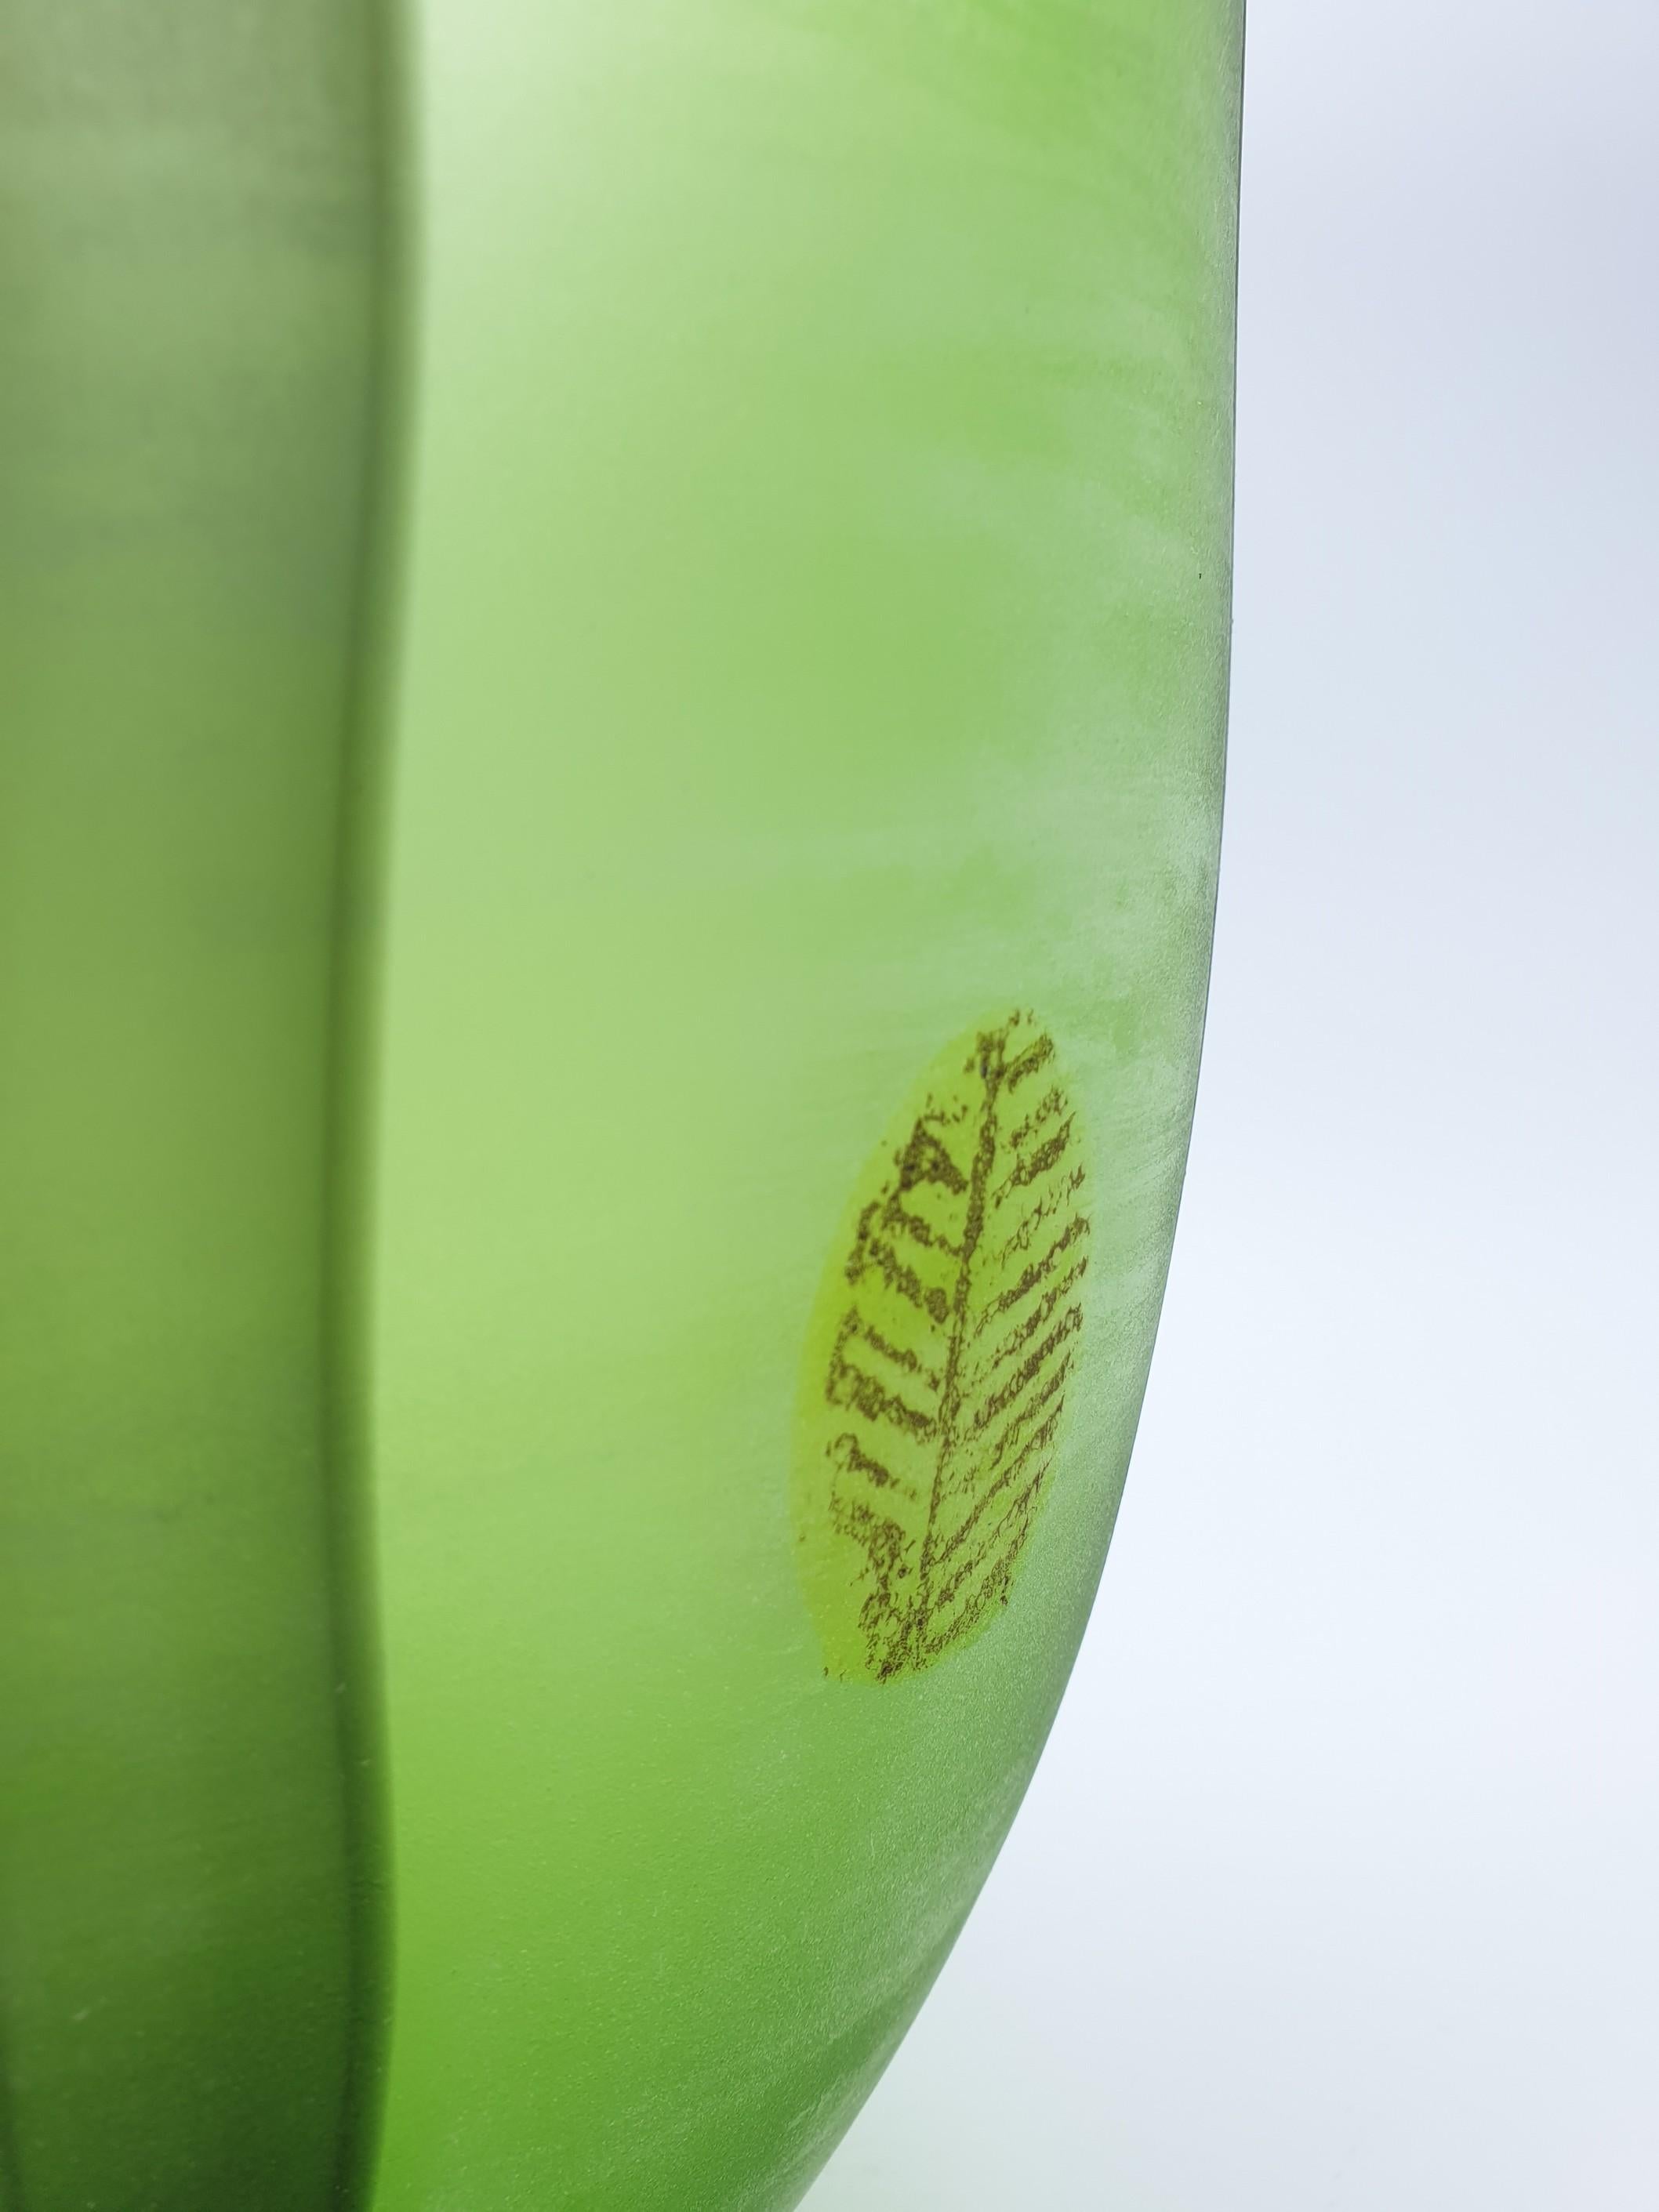 Modern Large Murano Glass Vase with Leaves in Sabbiato Finish, by Cenedese, 1988 For Sale 3